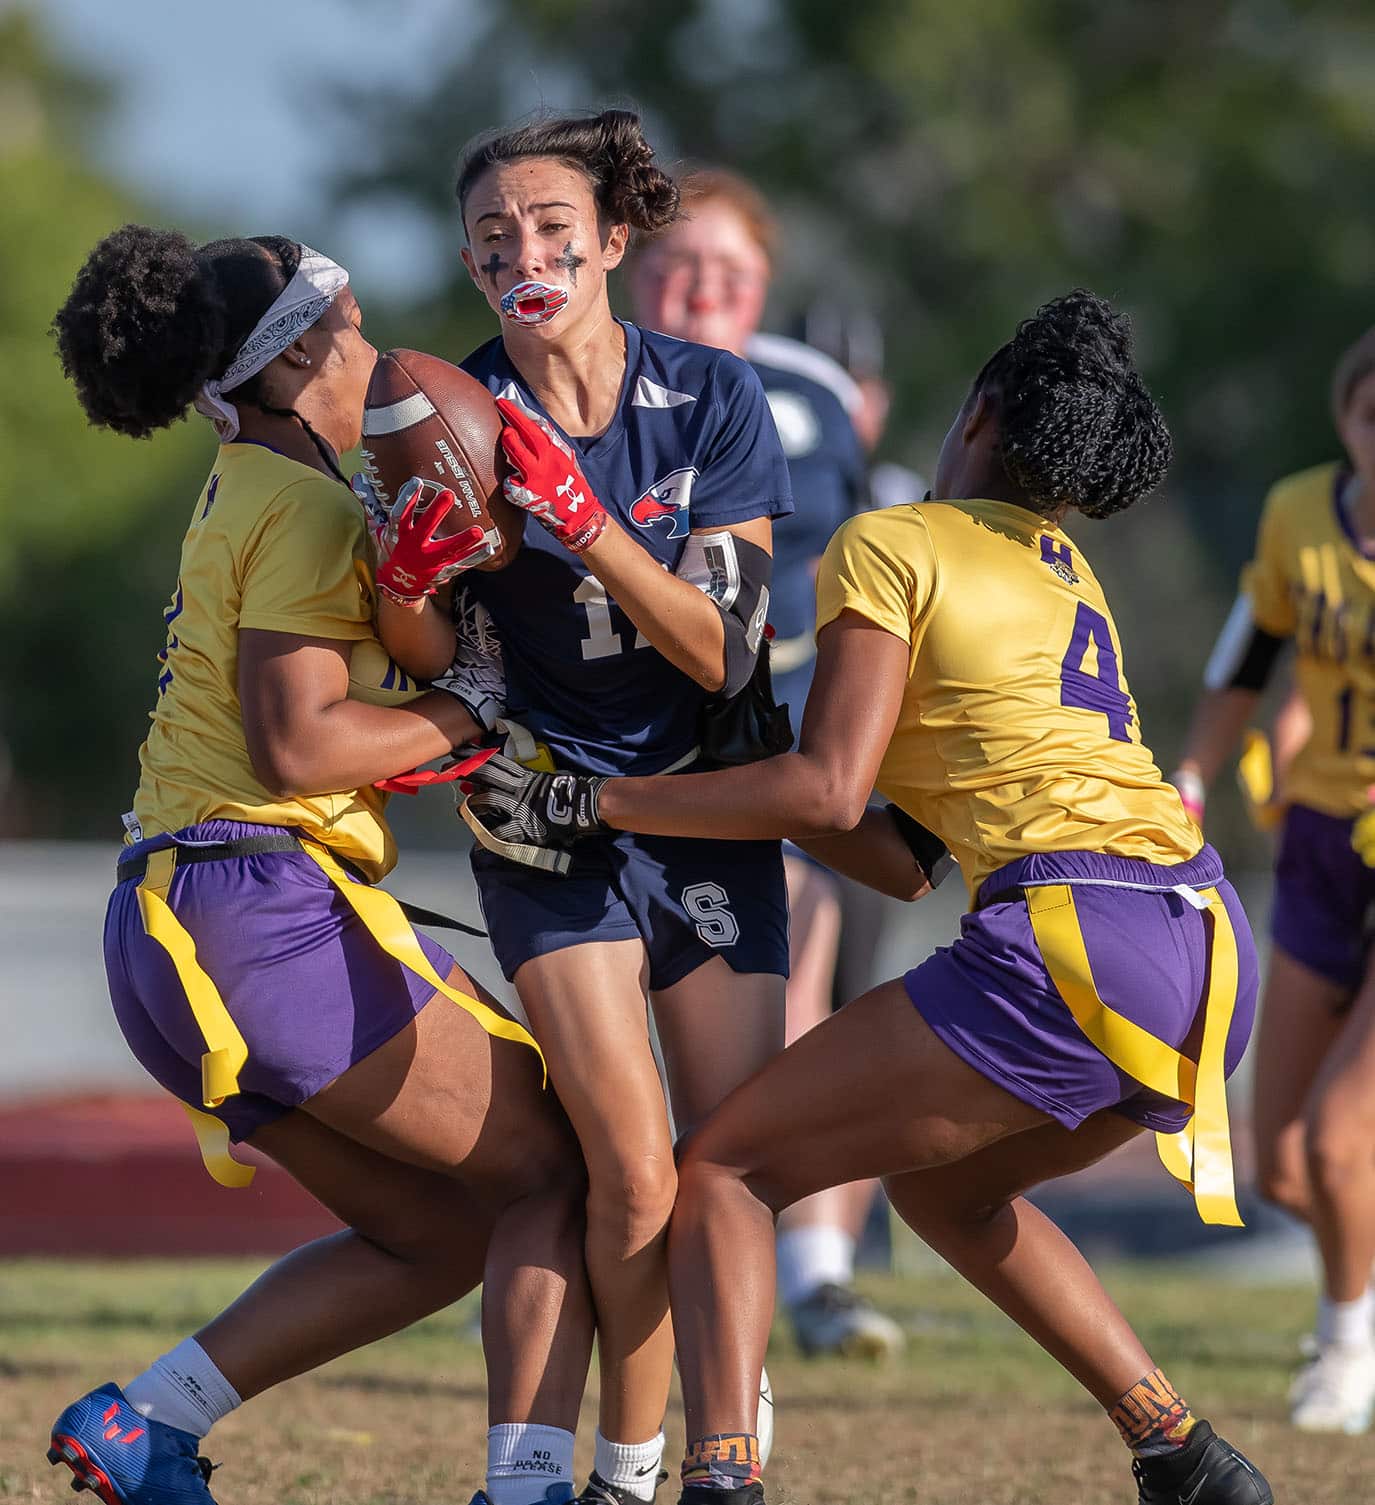 Springstead High’s ,17, Kandace Hanshaw has her progress stopped after catching a pass by Hernando High’s ,7, Shane Rayford and 4, Kayla Holloman Monday at Booster Stadium. Photo by JOE DiCRISTOFALO